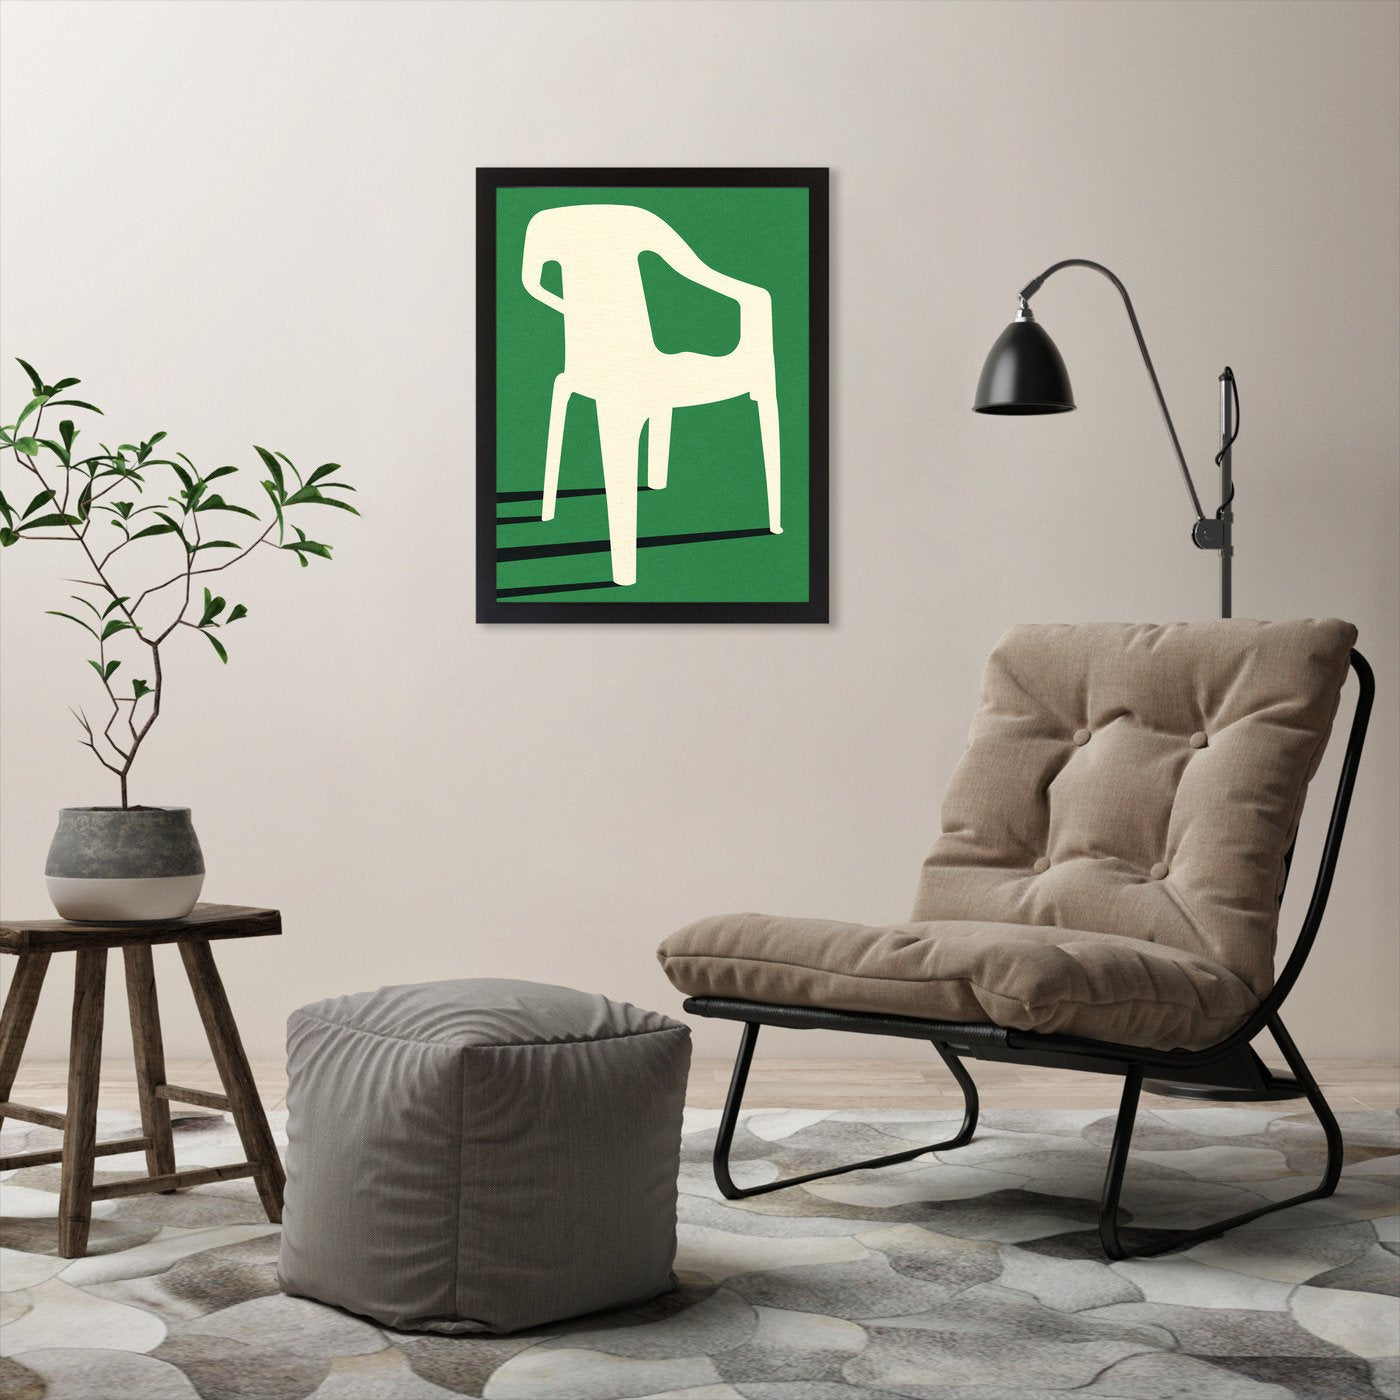 Monobloc Plastic Chair No Iii by Rosi Feist - Framed Print - Americanflat